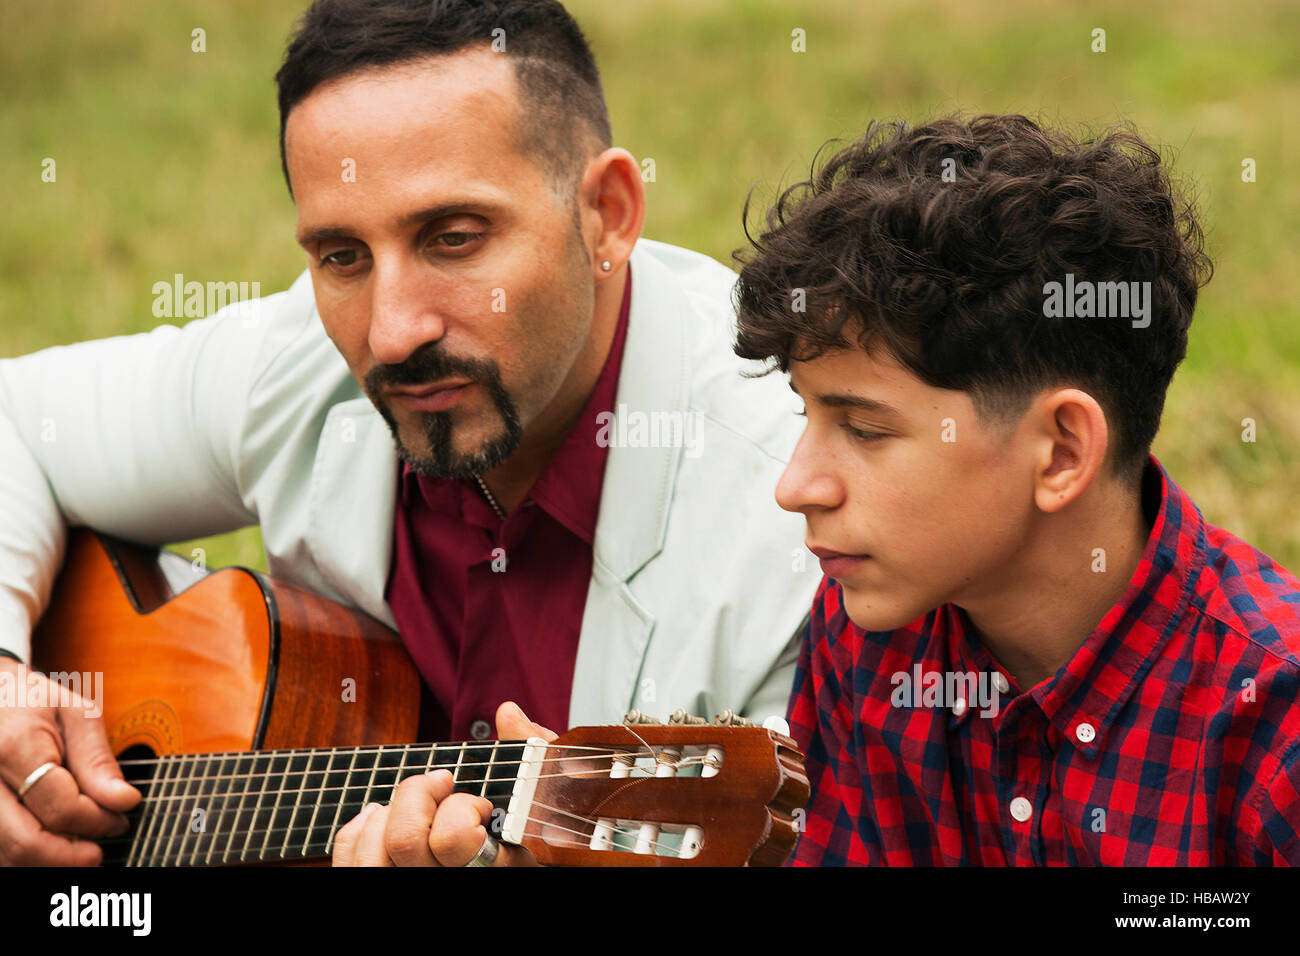 Father and son outdoors, father playing guitar Stock Photo